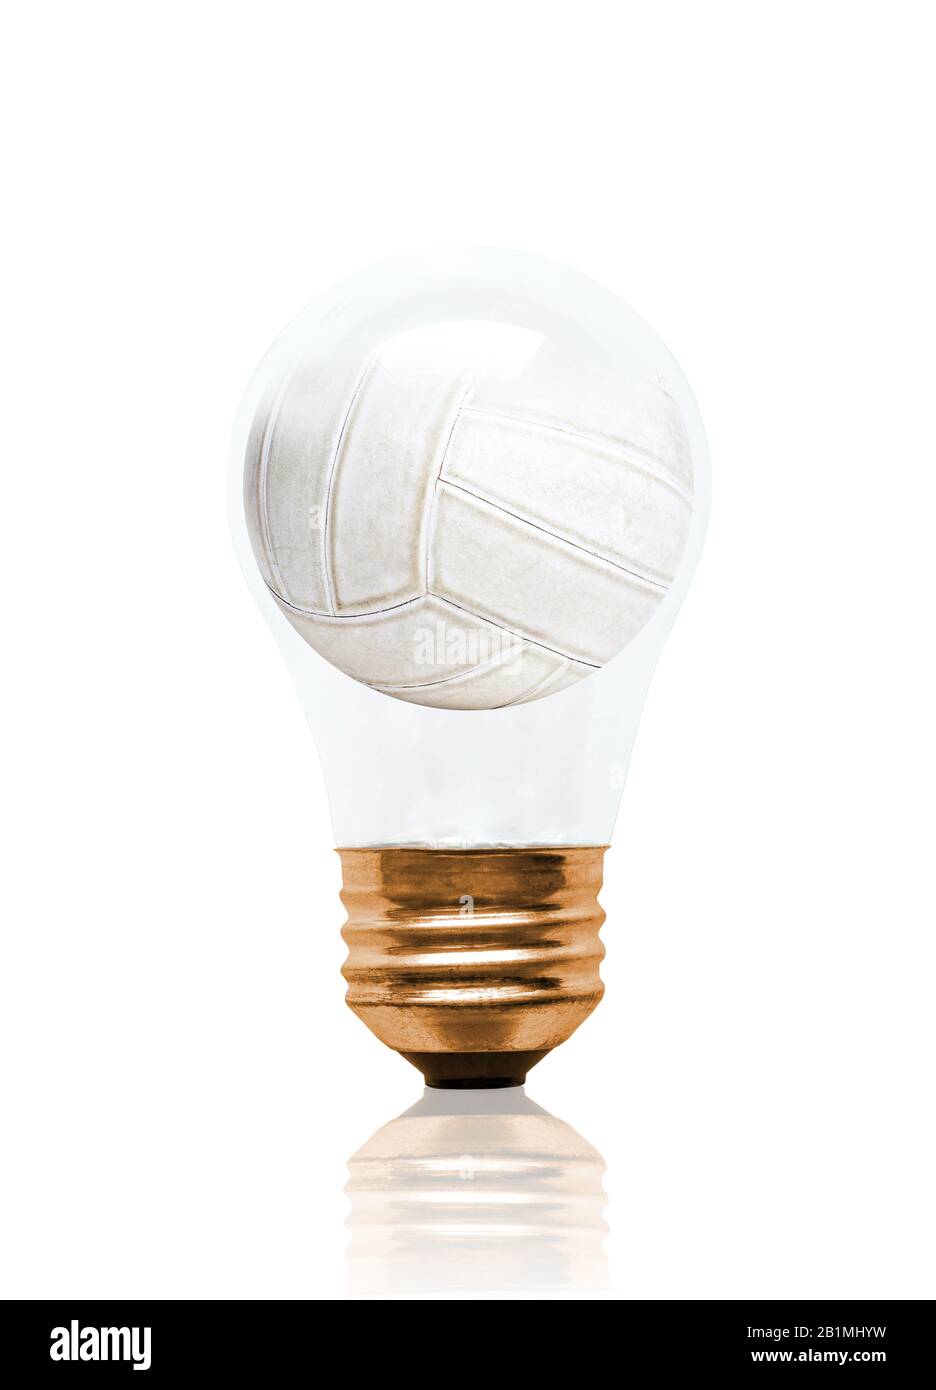 Volleyball inside light bulb against white background with copy space. Stock Photo